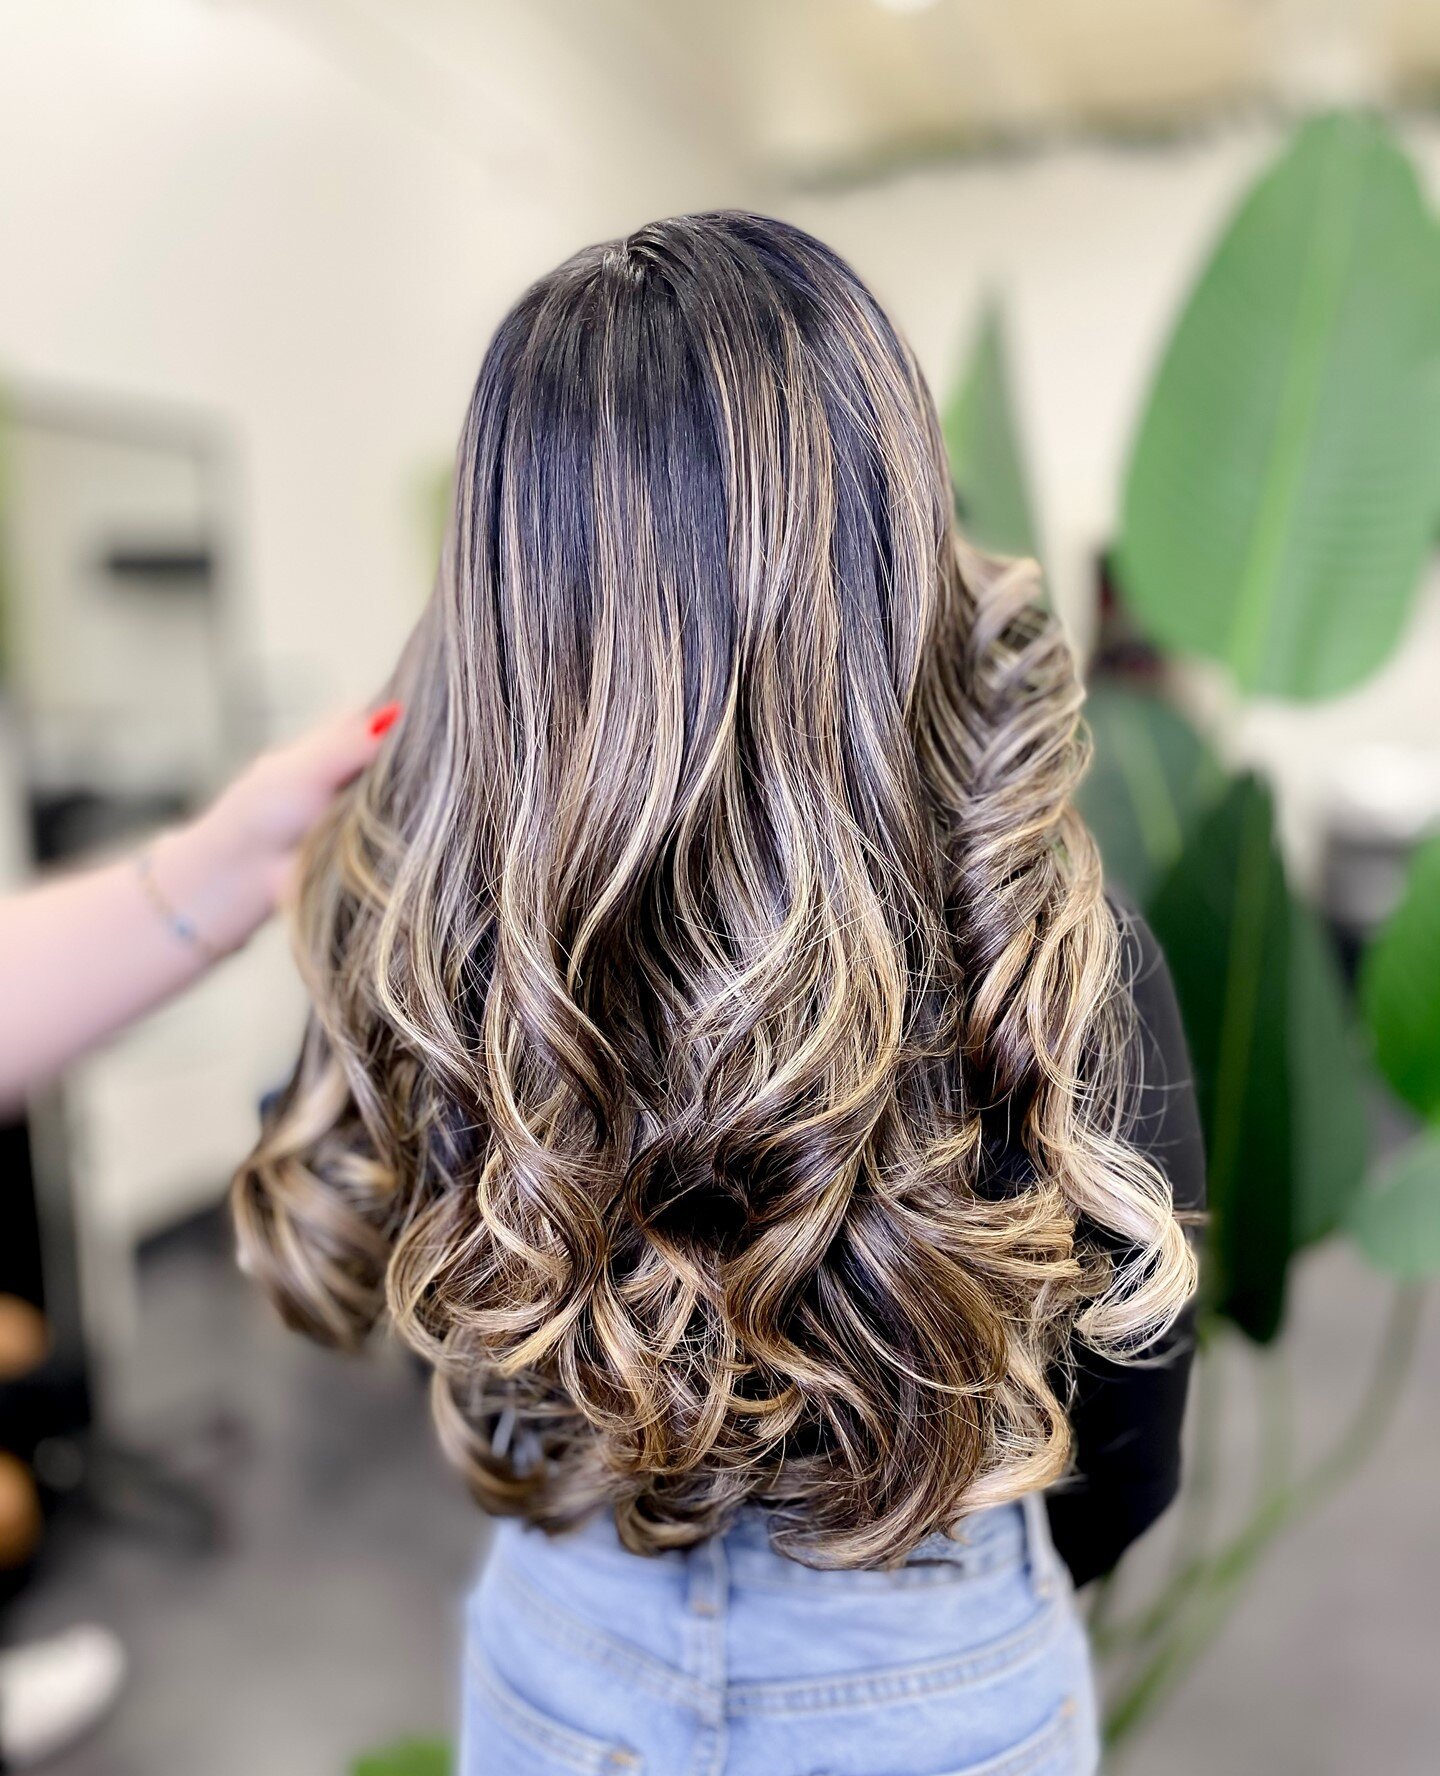 Bouncy volume you can't find anywhere else... #glamourax⁠
.⁠
.⁠
.⁠
.⁠
.⁠
 #beauty #hairstyle #style #beautiful #hairstylist #model #haircolor #instahair #photooftheday #haircut #pretty #haircare #longhair #behindthechair #stylish #hairsalon #hairofin